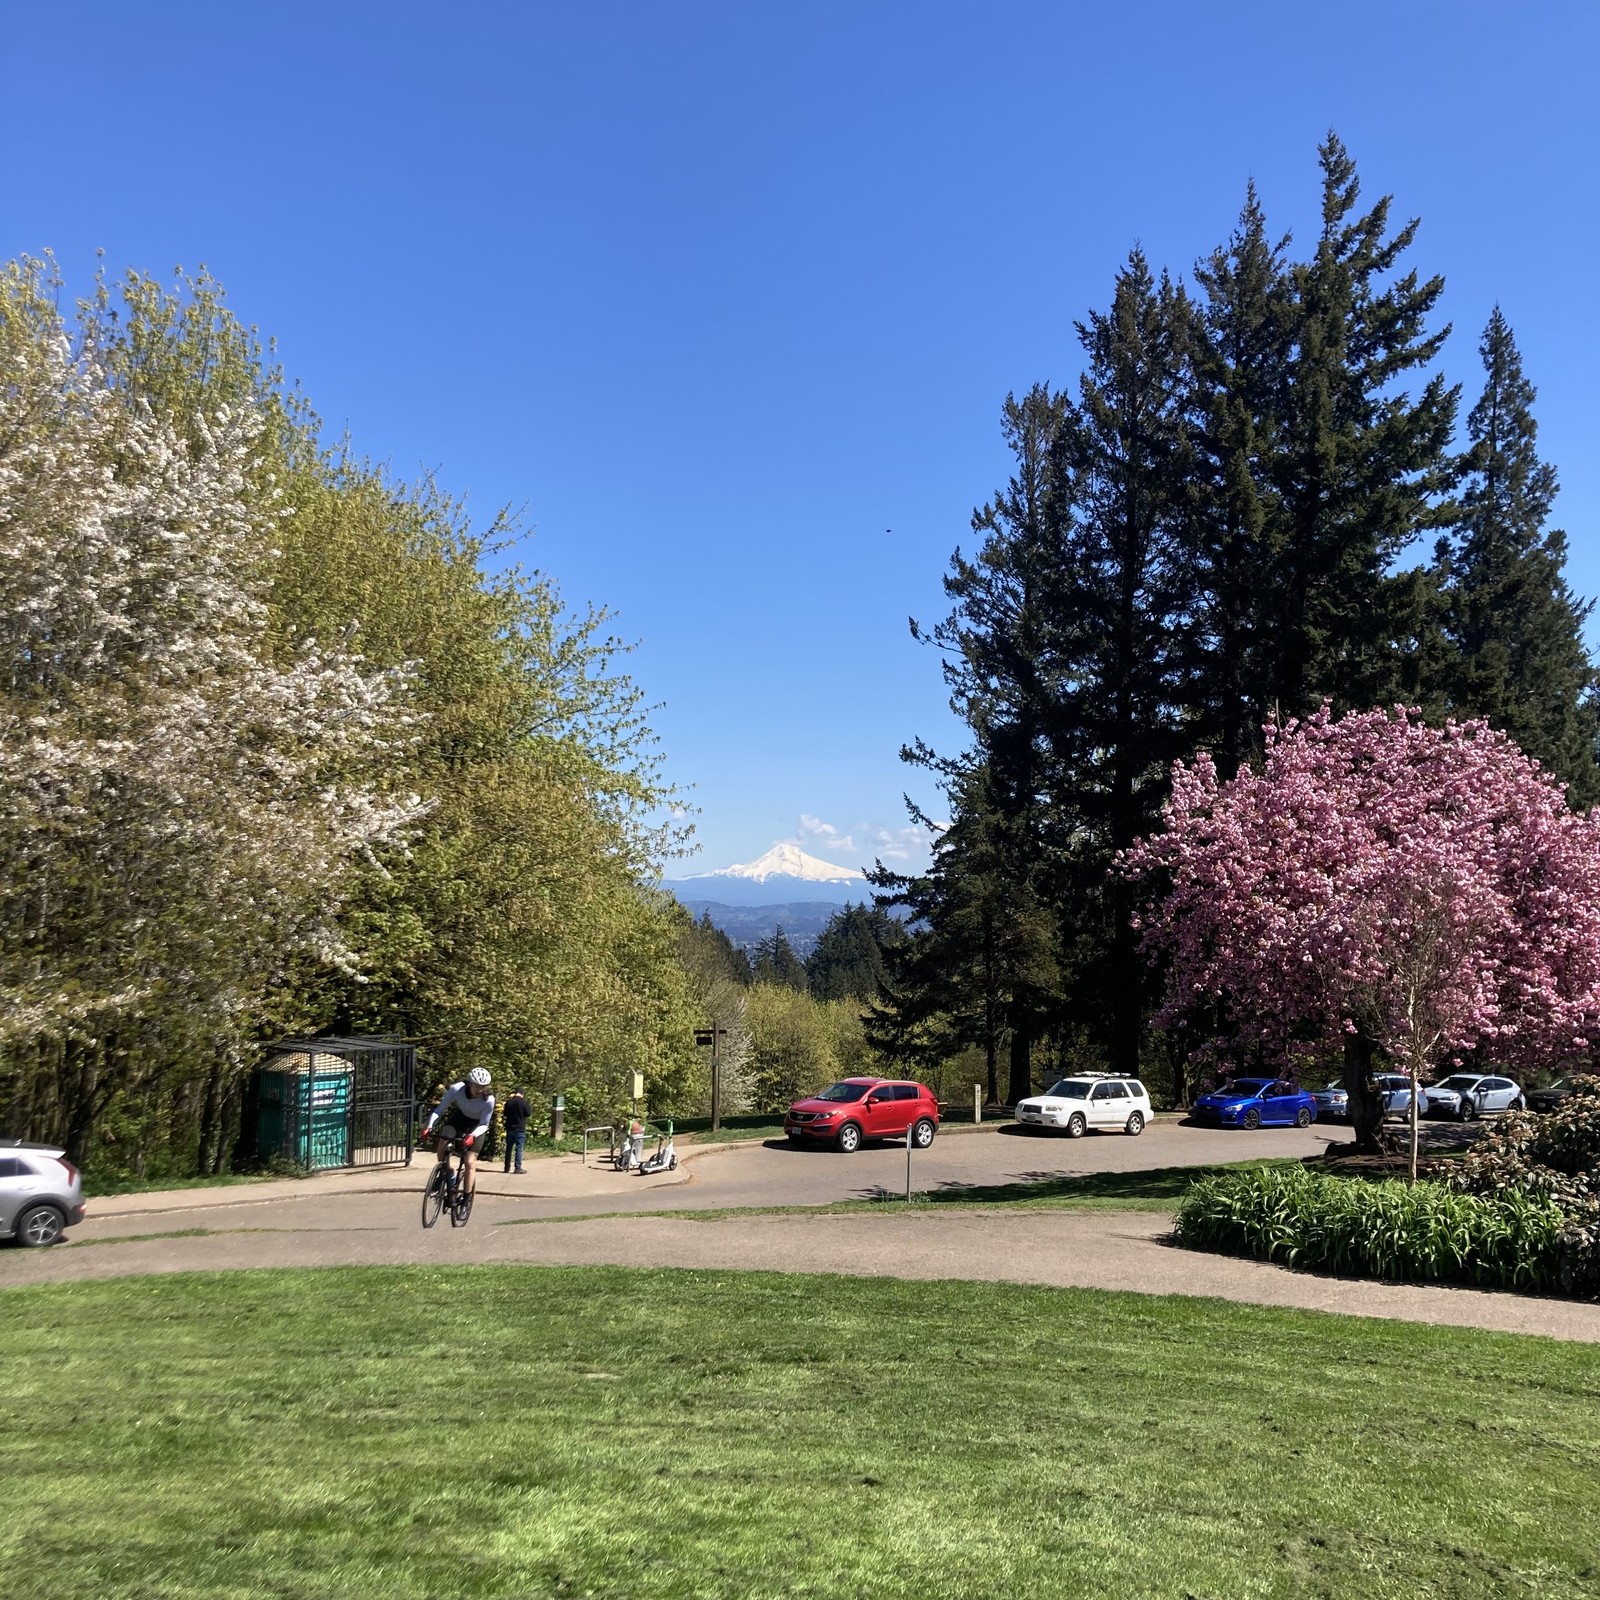 Mt. Hood under a deep blue sky on a day of almost psychedelic clarity. Distant objects merely seem smaller, as if seen through the vacuum of space. The plum tree in the near midground is in full bloom. A cyclist rides up the path towards us. A single crow in the sky, about 200' distant.